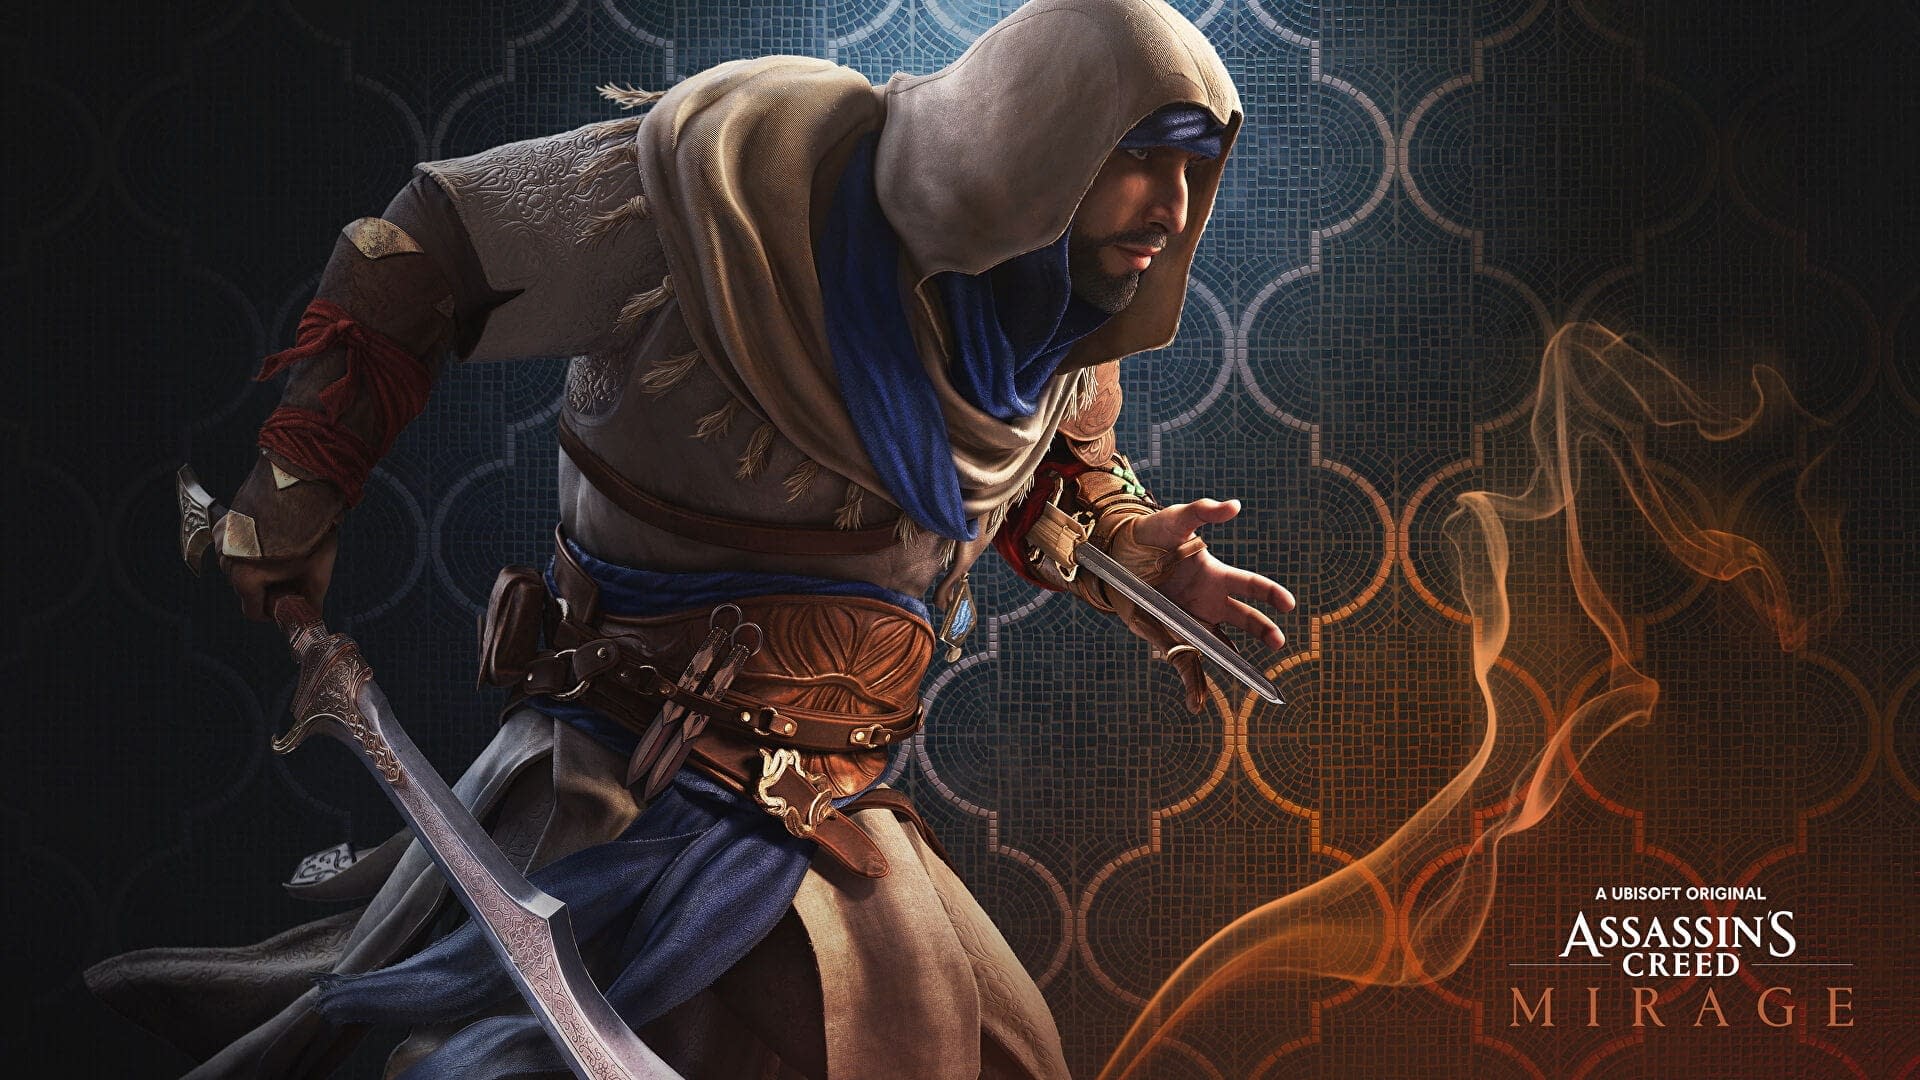 Assassin’s Creed Mirage Released Date Featured!